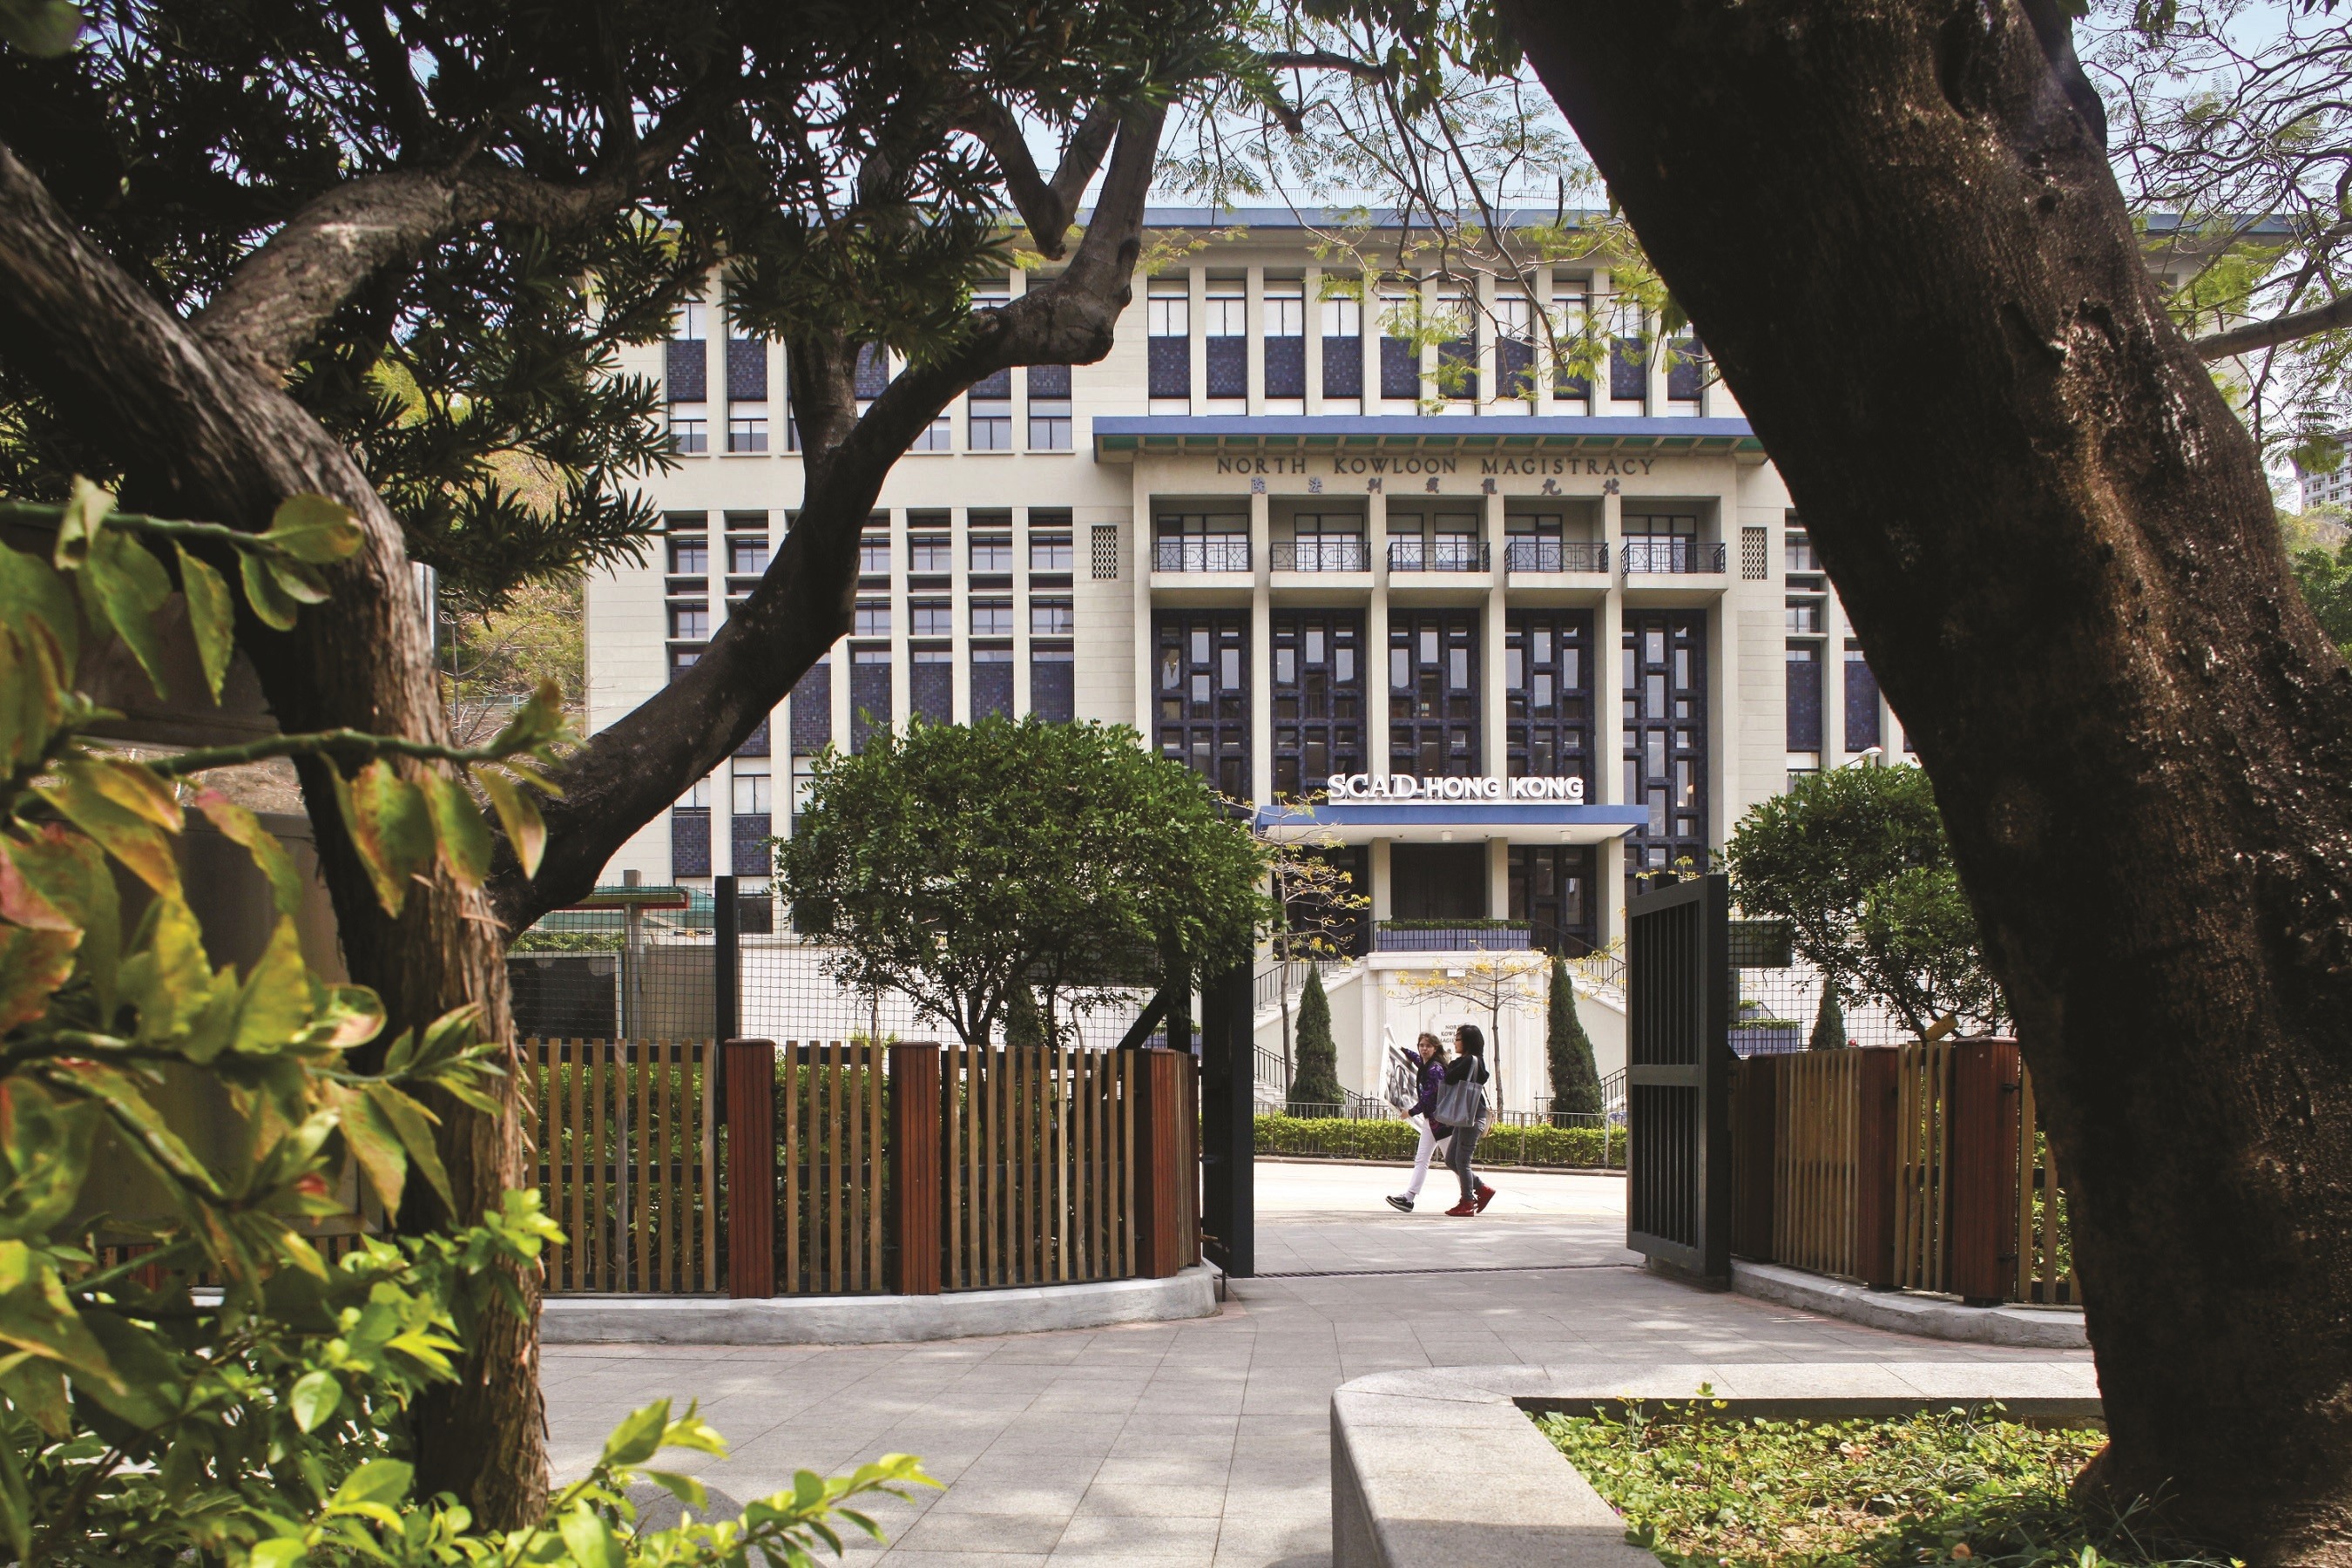 Exterior of the SCAD (Savannah College of Art and Design) Hong Kong campus, formerly the North Kowloon Magistracy building. Photo: SCAD